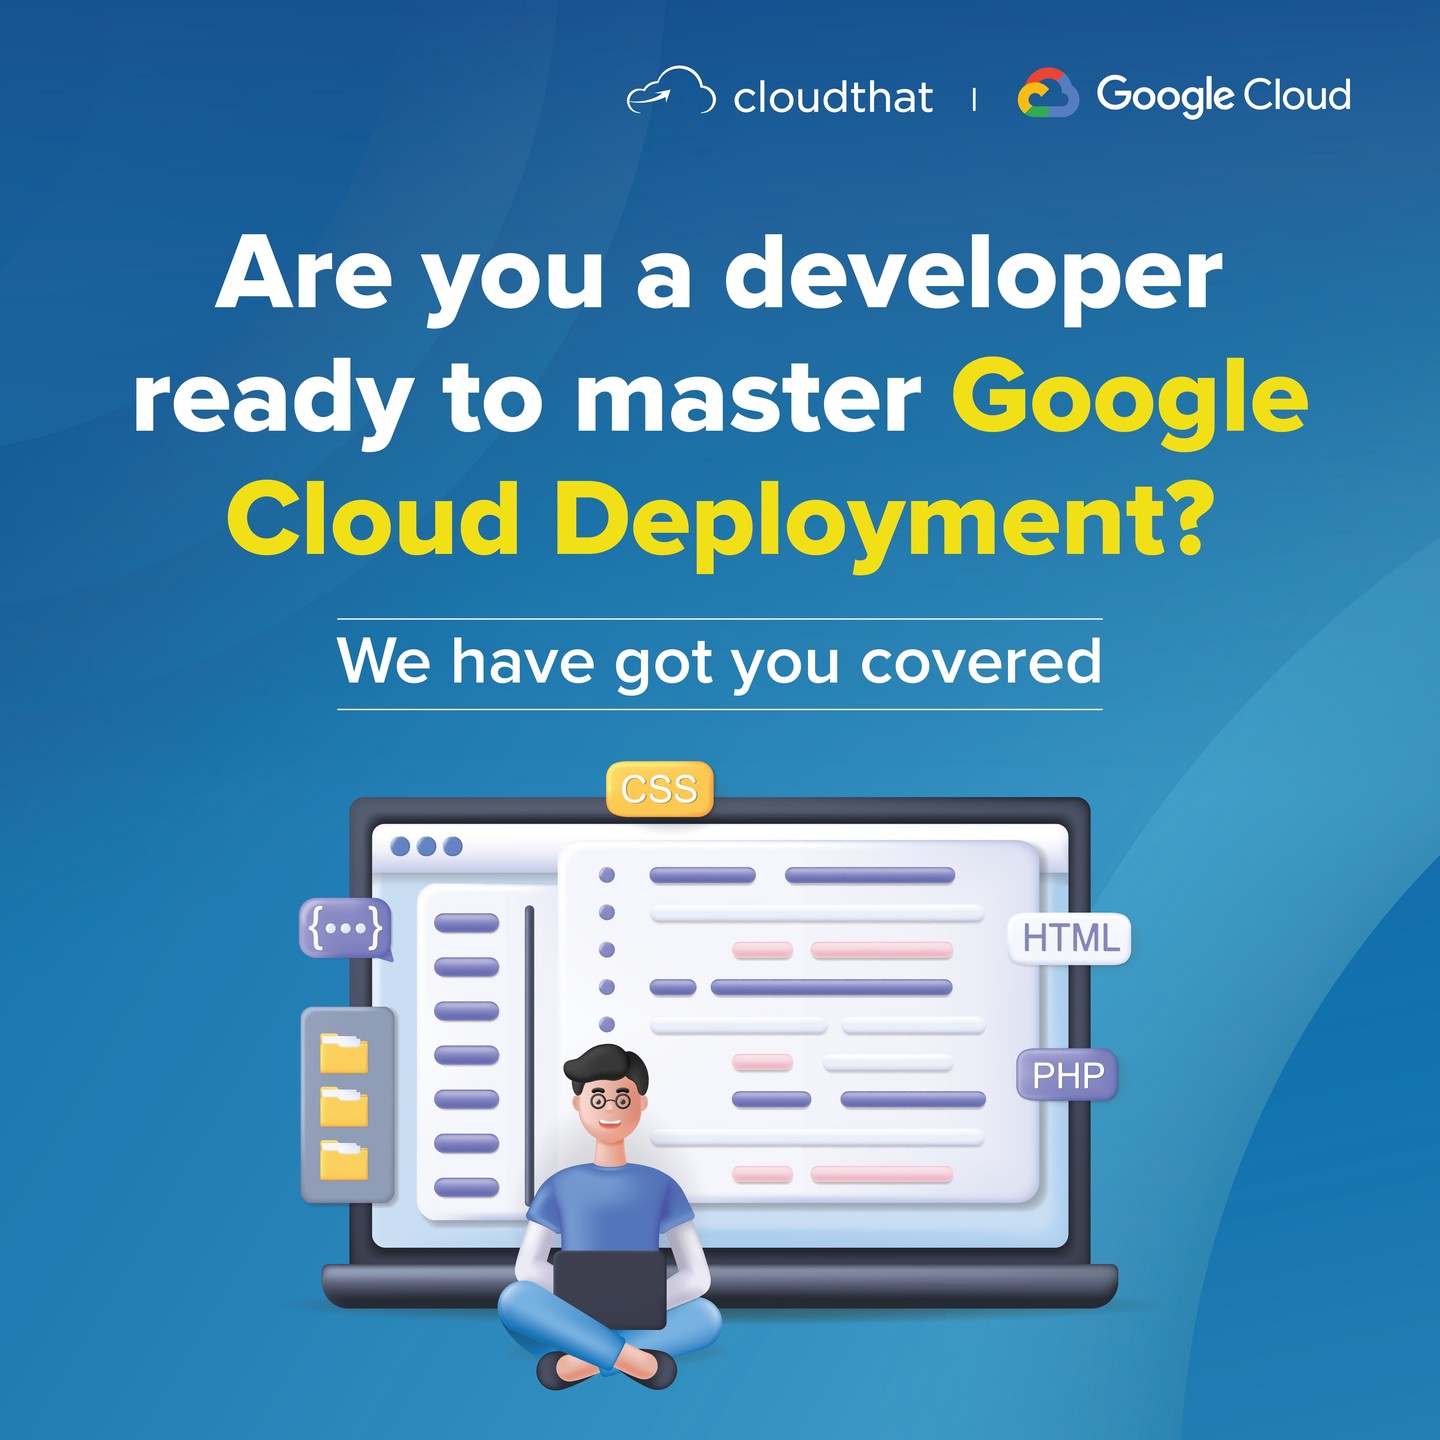 Register here for GCP Fundamentals - link in bio

Launch your journey into @googlecloud with our FREE GCP Fundamentals training, led by our Google Cloud Expert, Babajan Tamboli. This course covers top-notch solutions like App Engine, Cloud Storage, and Cloud SQL, along with essential resource management tools.

What is in it for you?
1. Learn from GCP Certified in-house expert
2. Live Q&A Session
3. Receive a Participation Certificate
@Google 

#GoogleCloud #techtraining #FreeTraining #developers #cloudtraining #Google